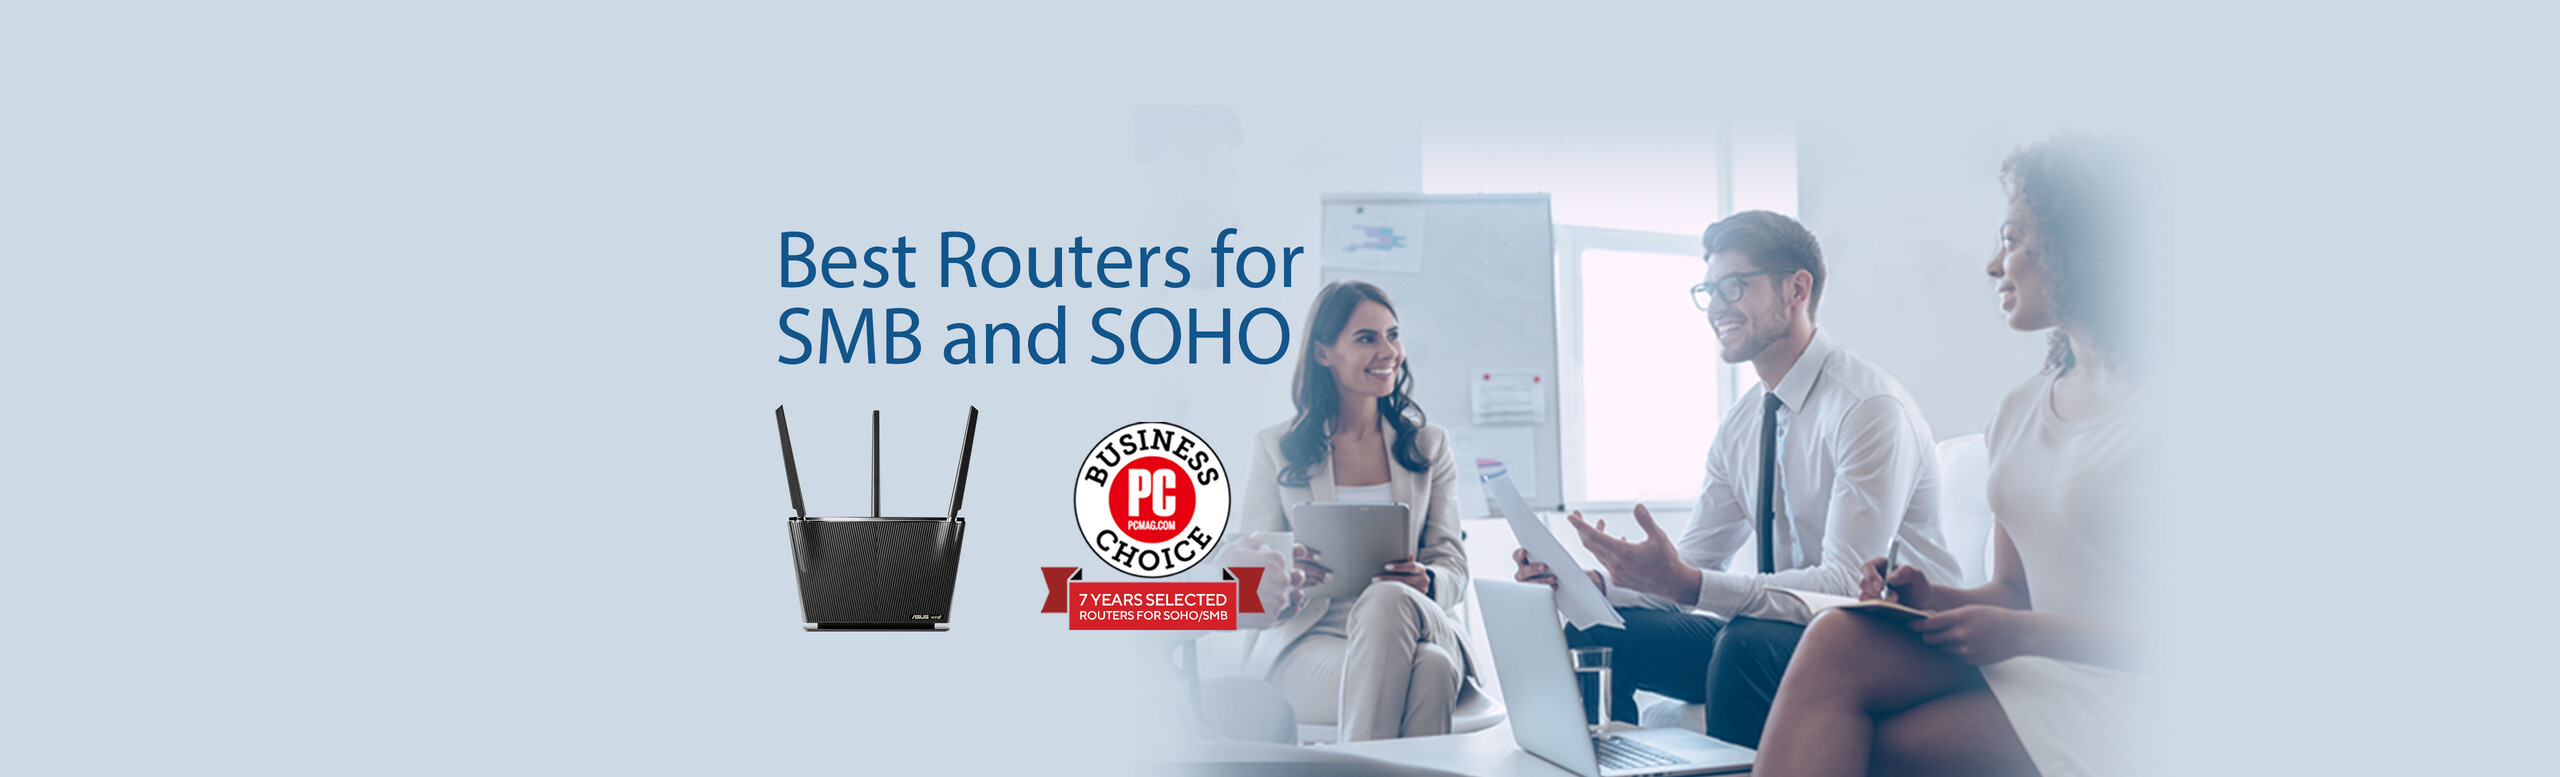 Best routers for smb/soho business